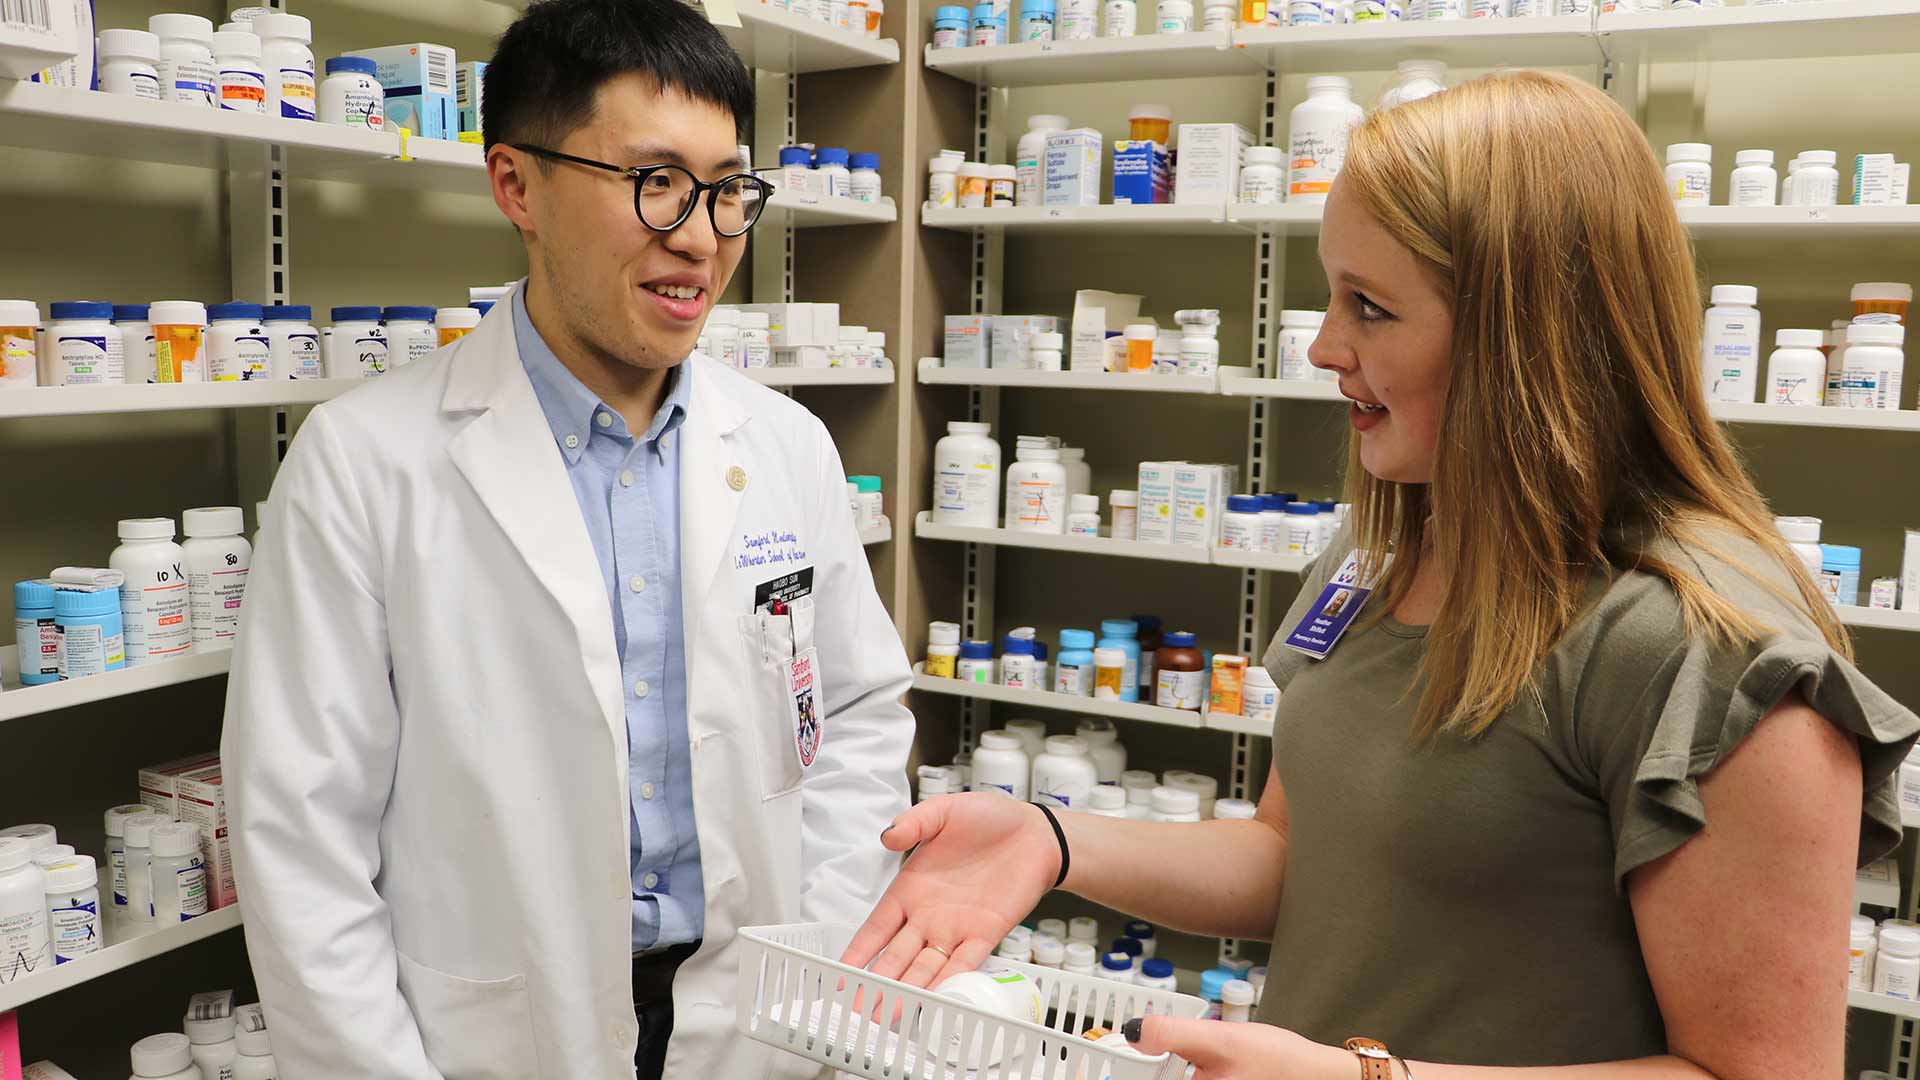 male and female pharmacy students discuss practice